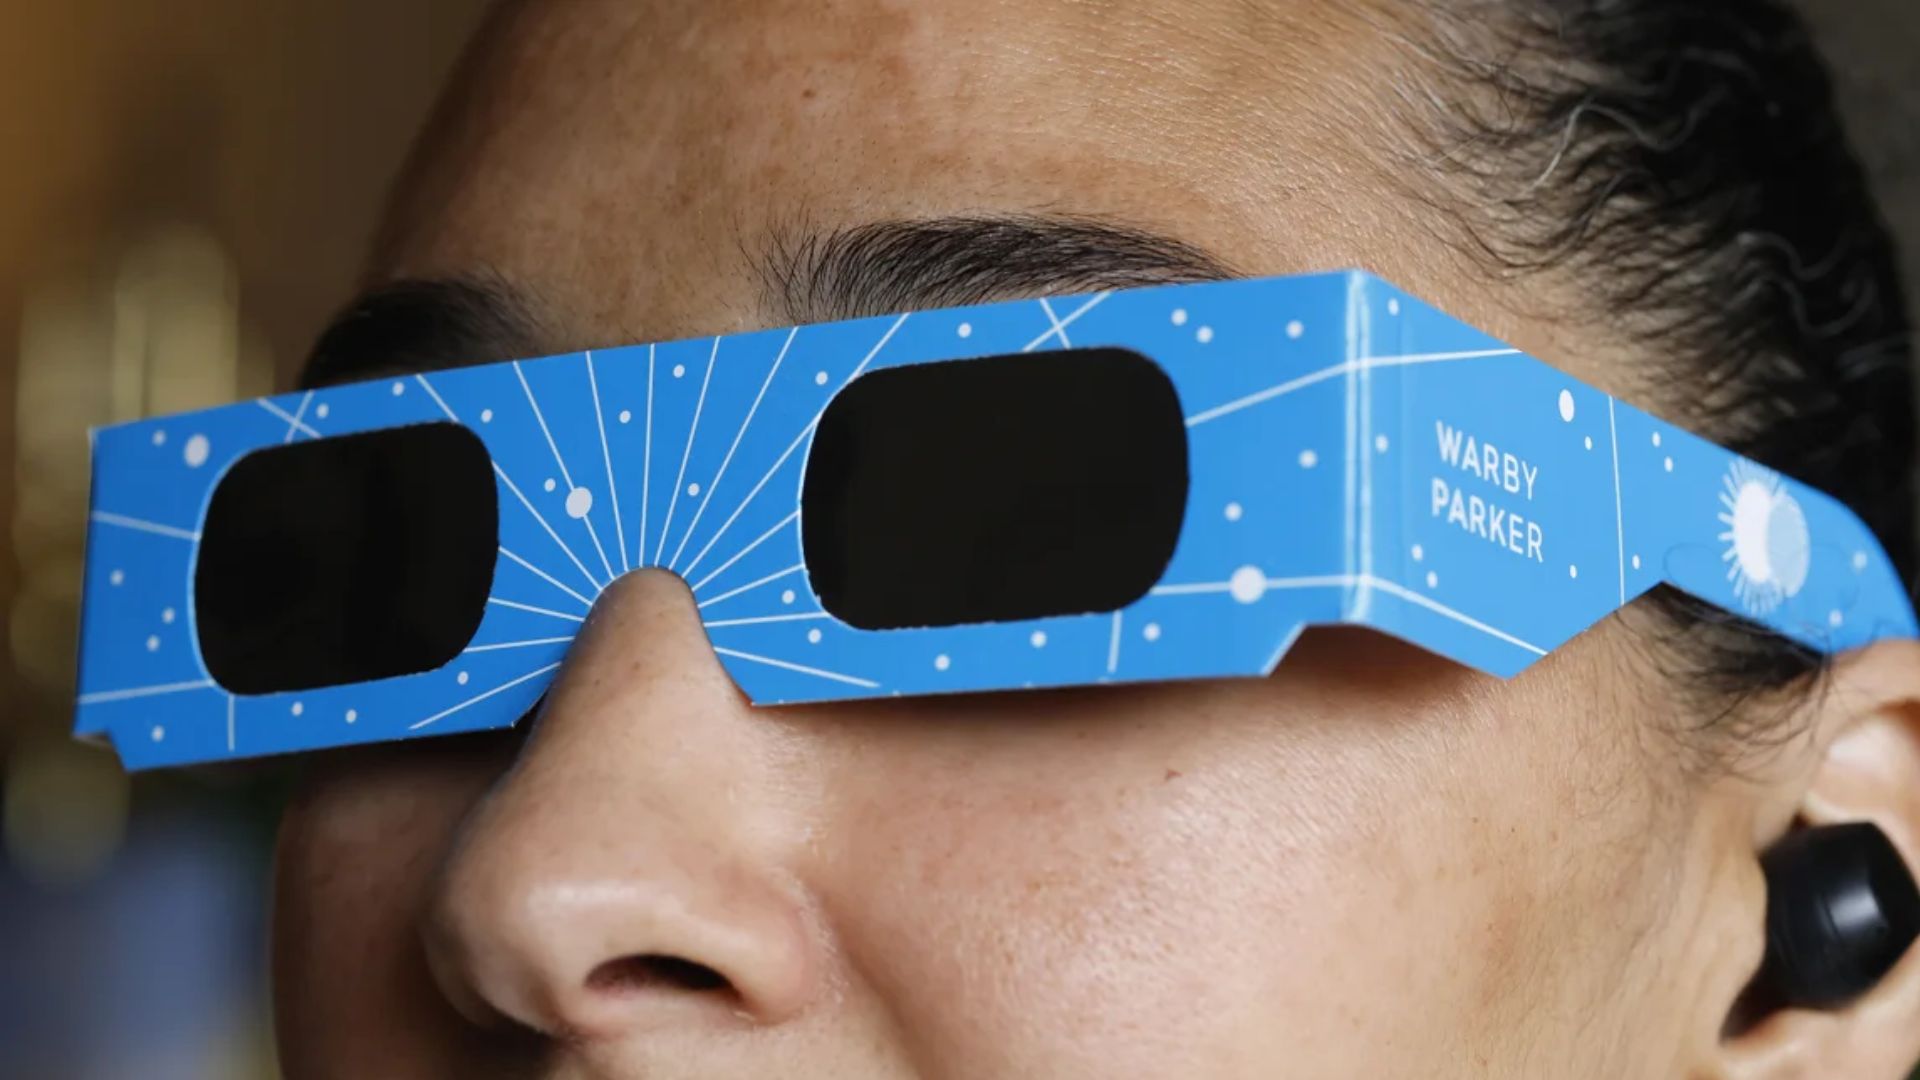 Doughnuts, smoothies, pizza, MoonPie, eyewear — brands are going all out-of-this-world with solar eclipse-themed goodies